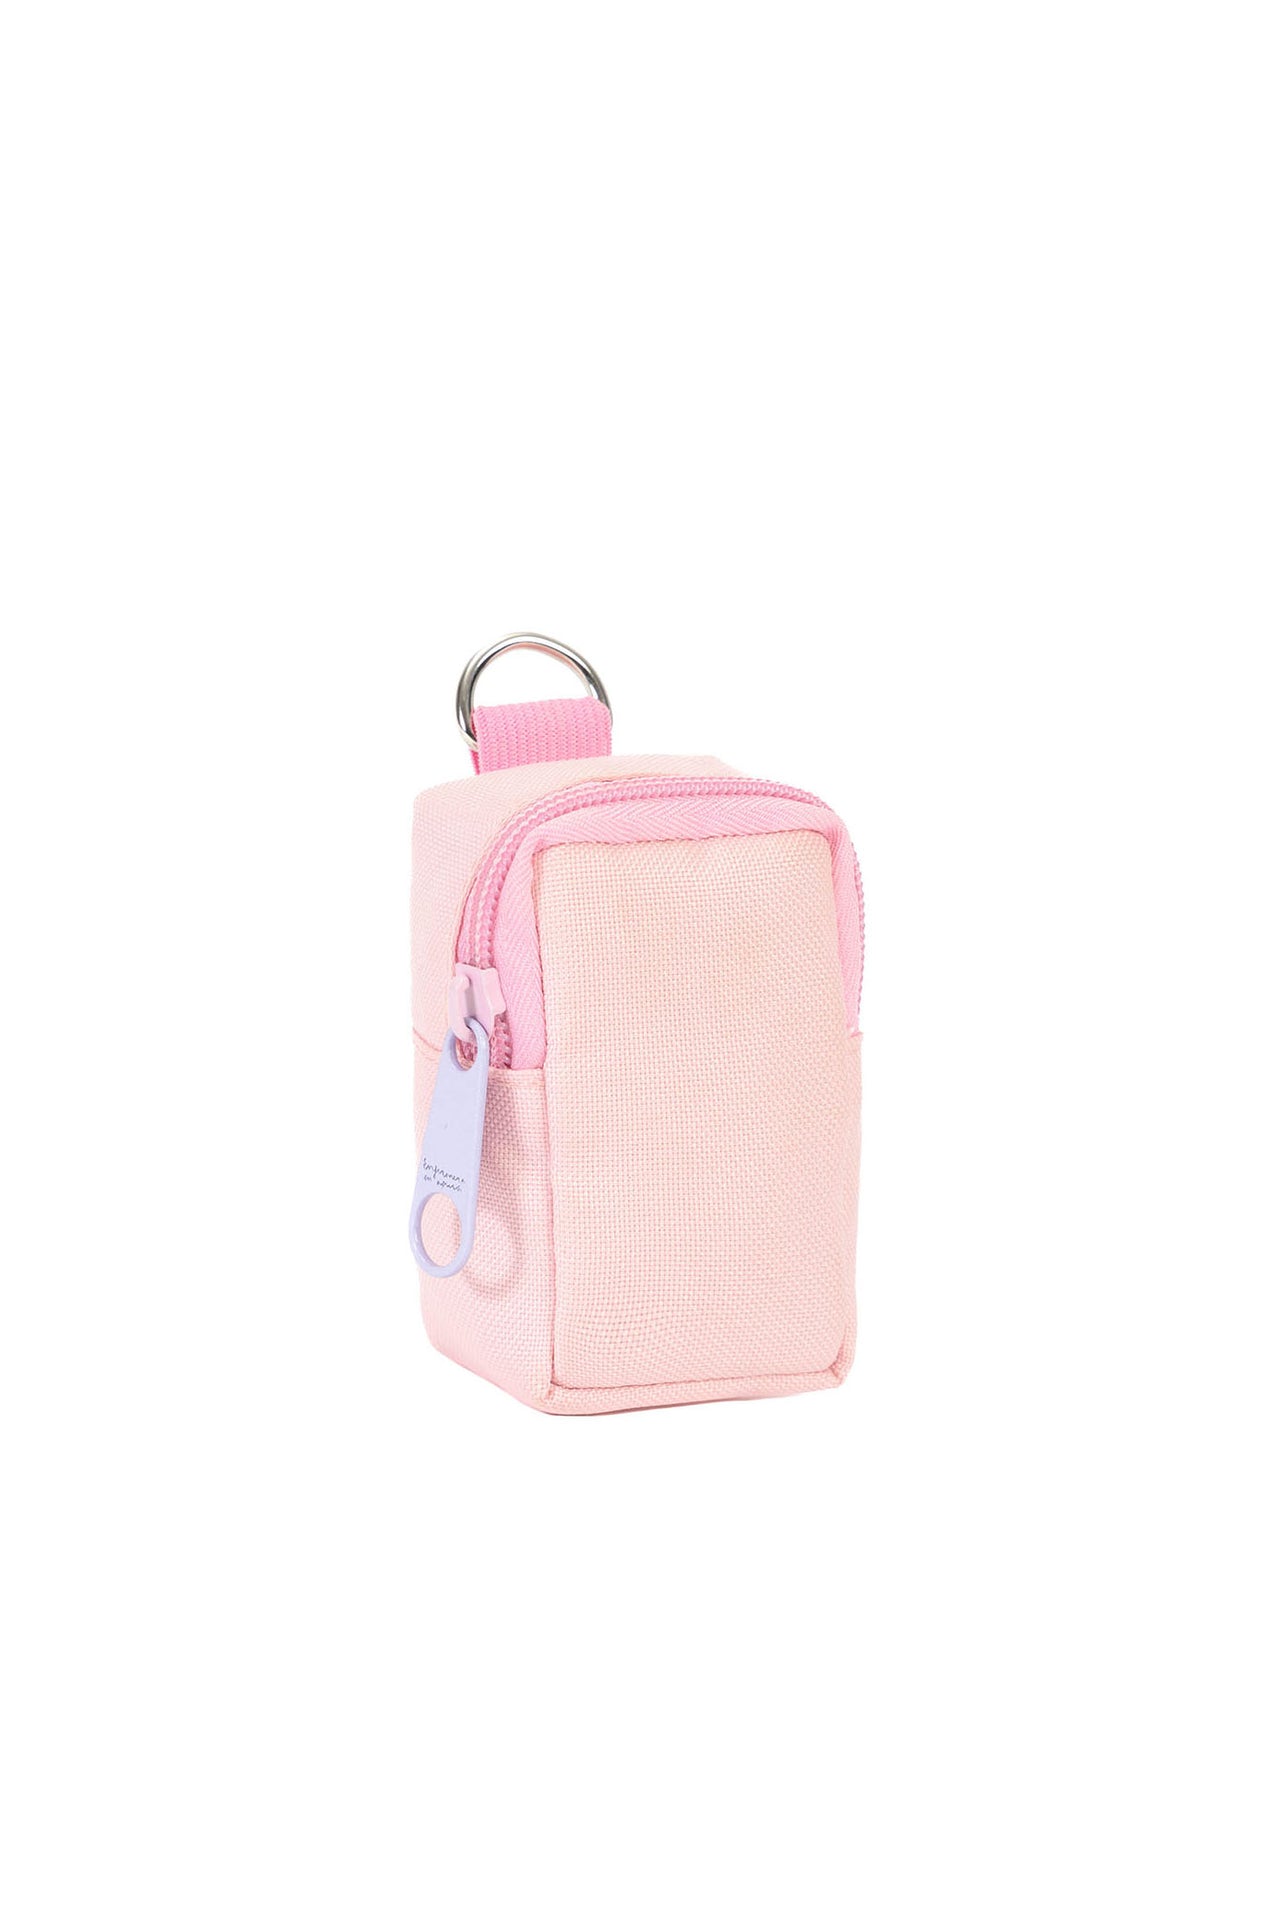 PULSE OXIMETER CARRY CASE PINK